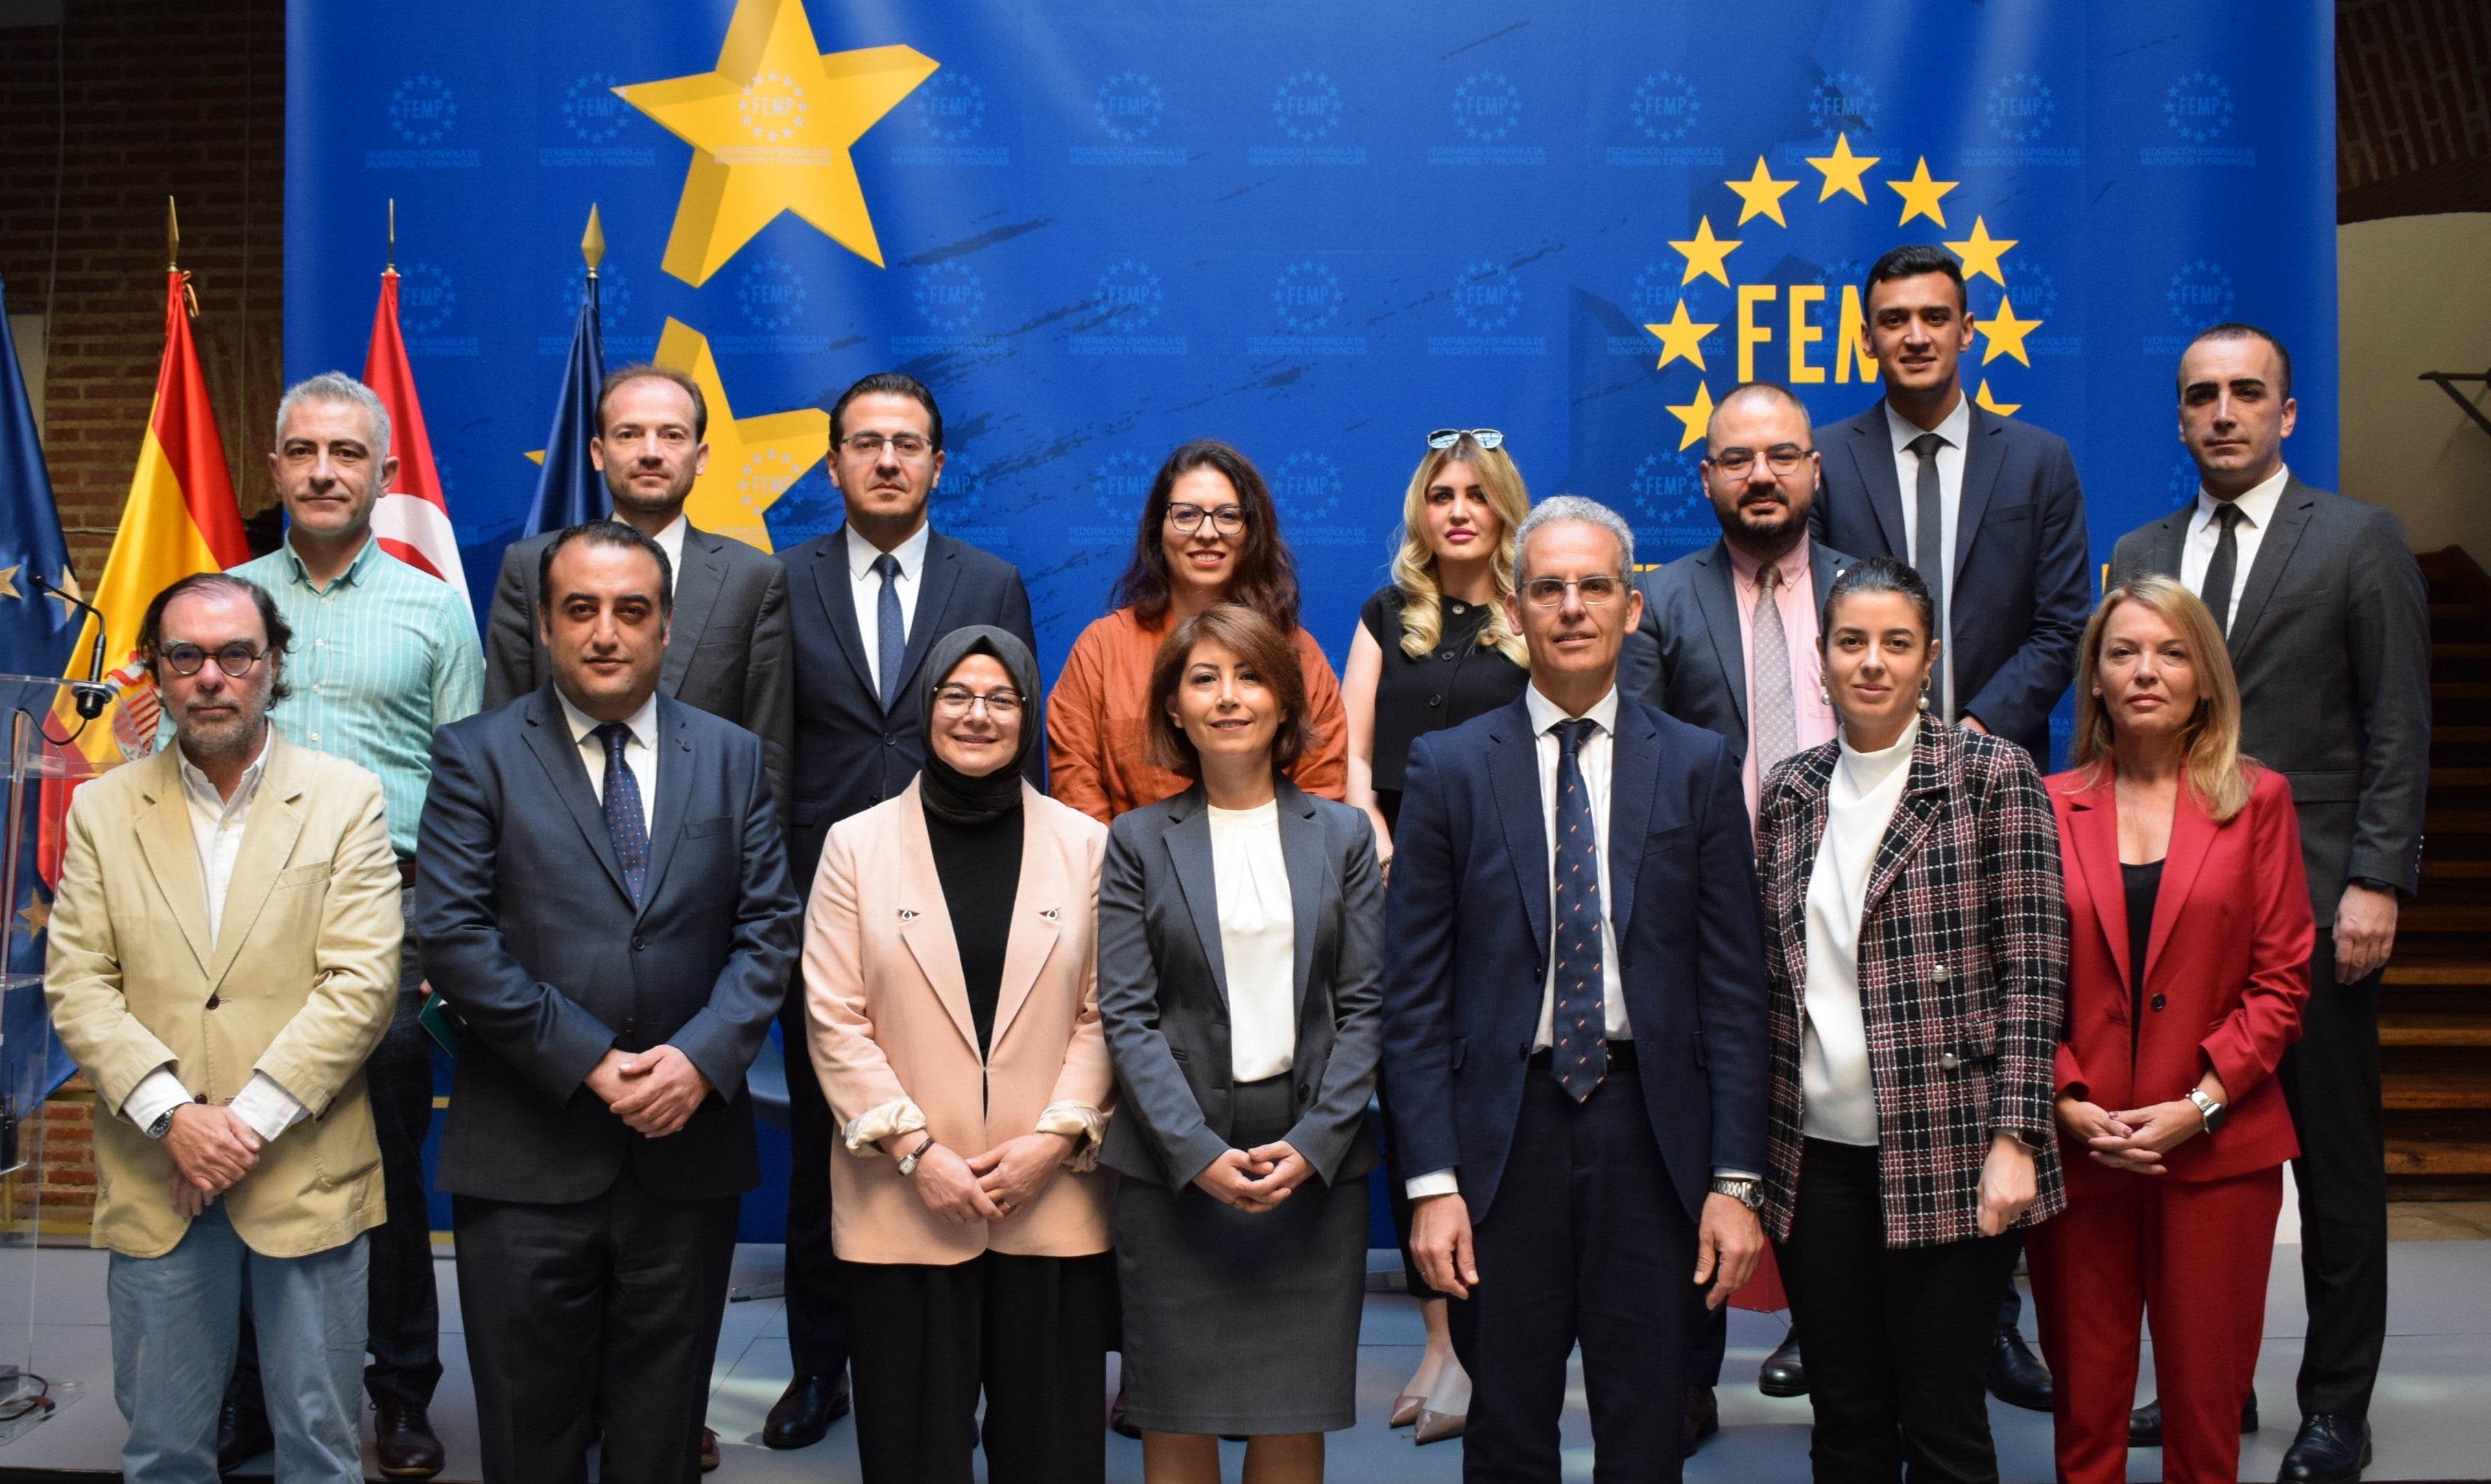 A high-level delegation involving several Turkish institutions conducted a study visit to the Spain to learn about best practices and exchange experiences on gender-responsive budgeting (GRB). Photo: UN Women